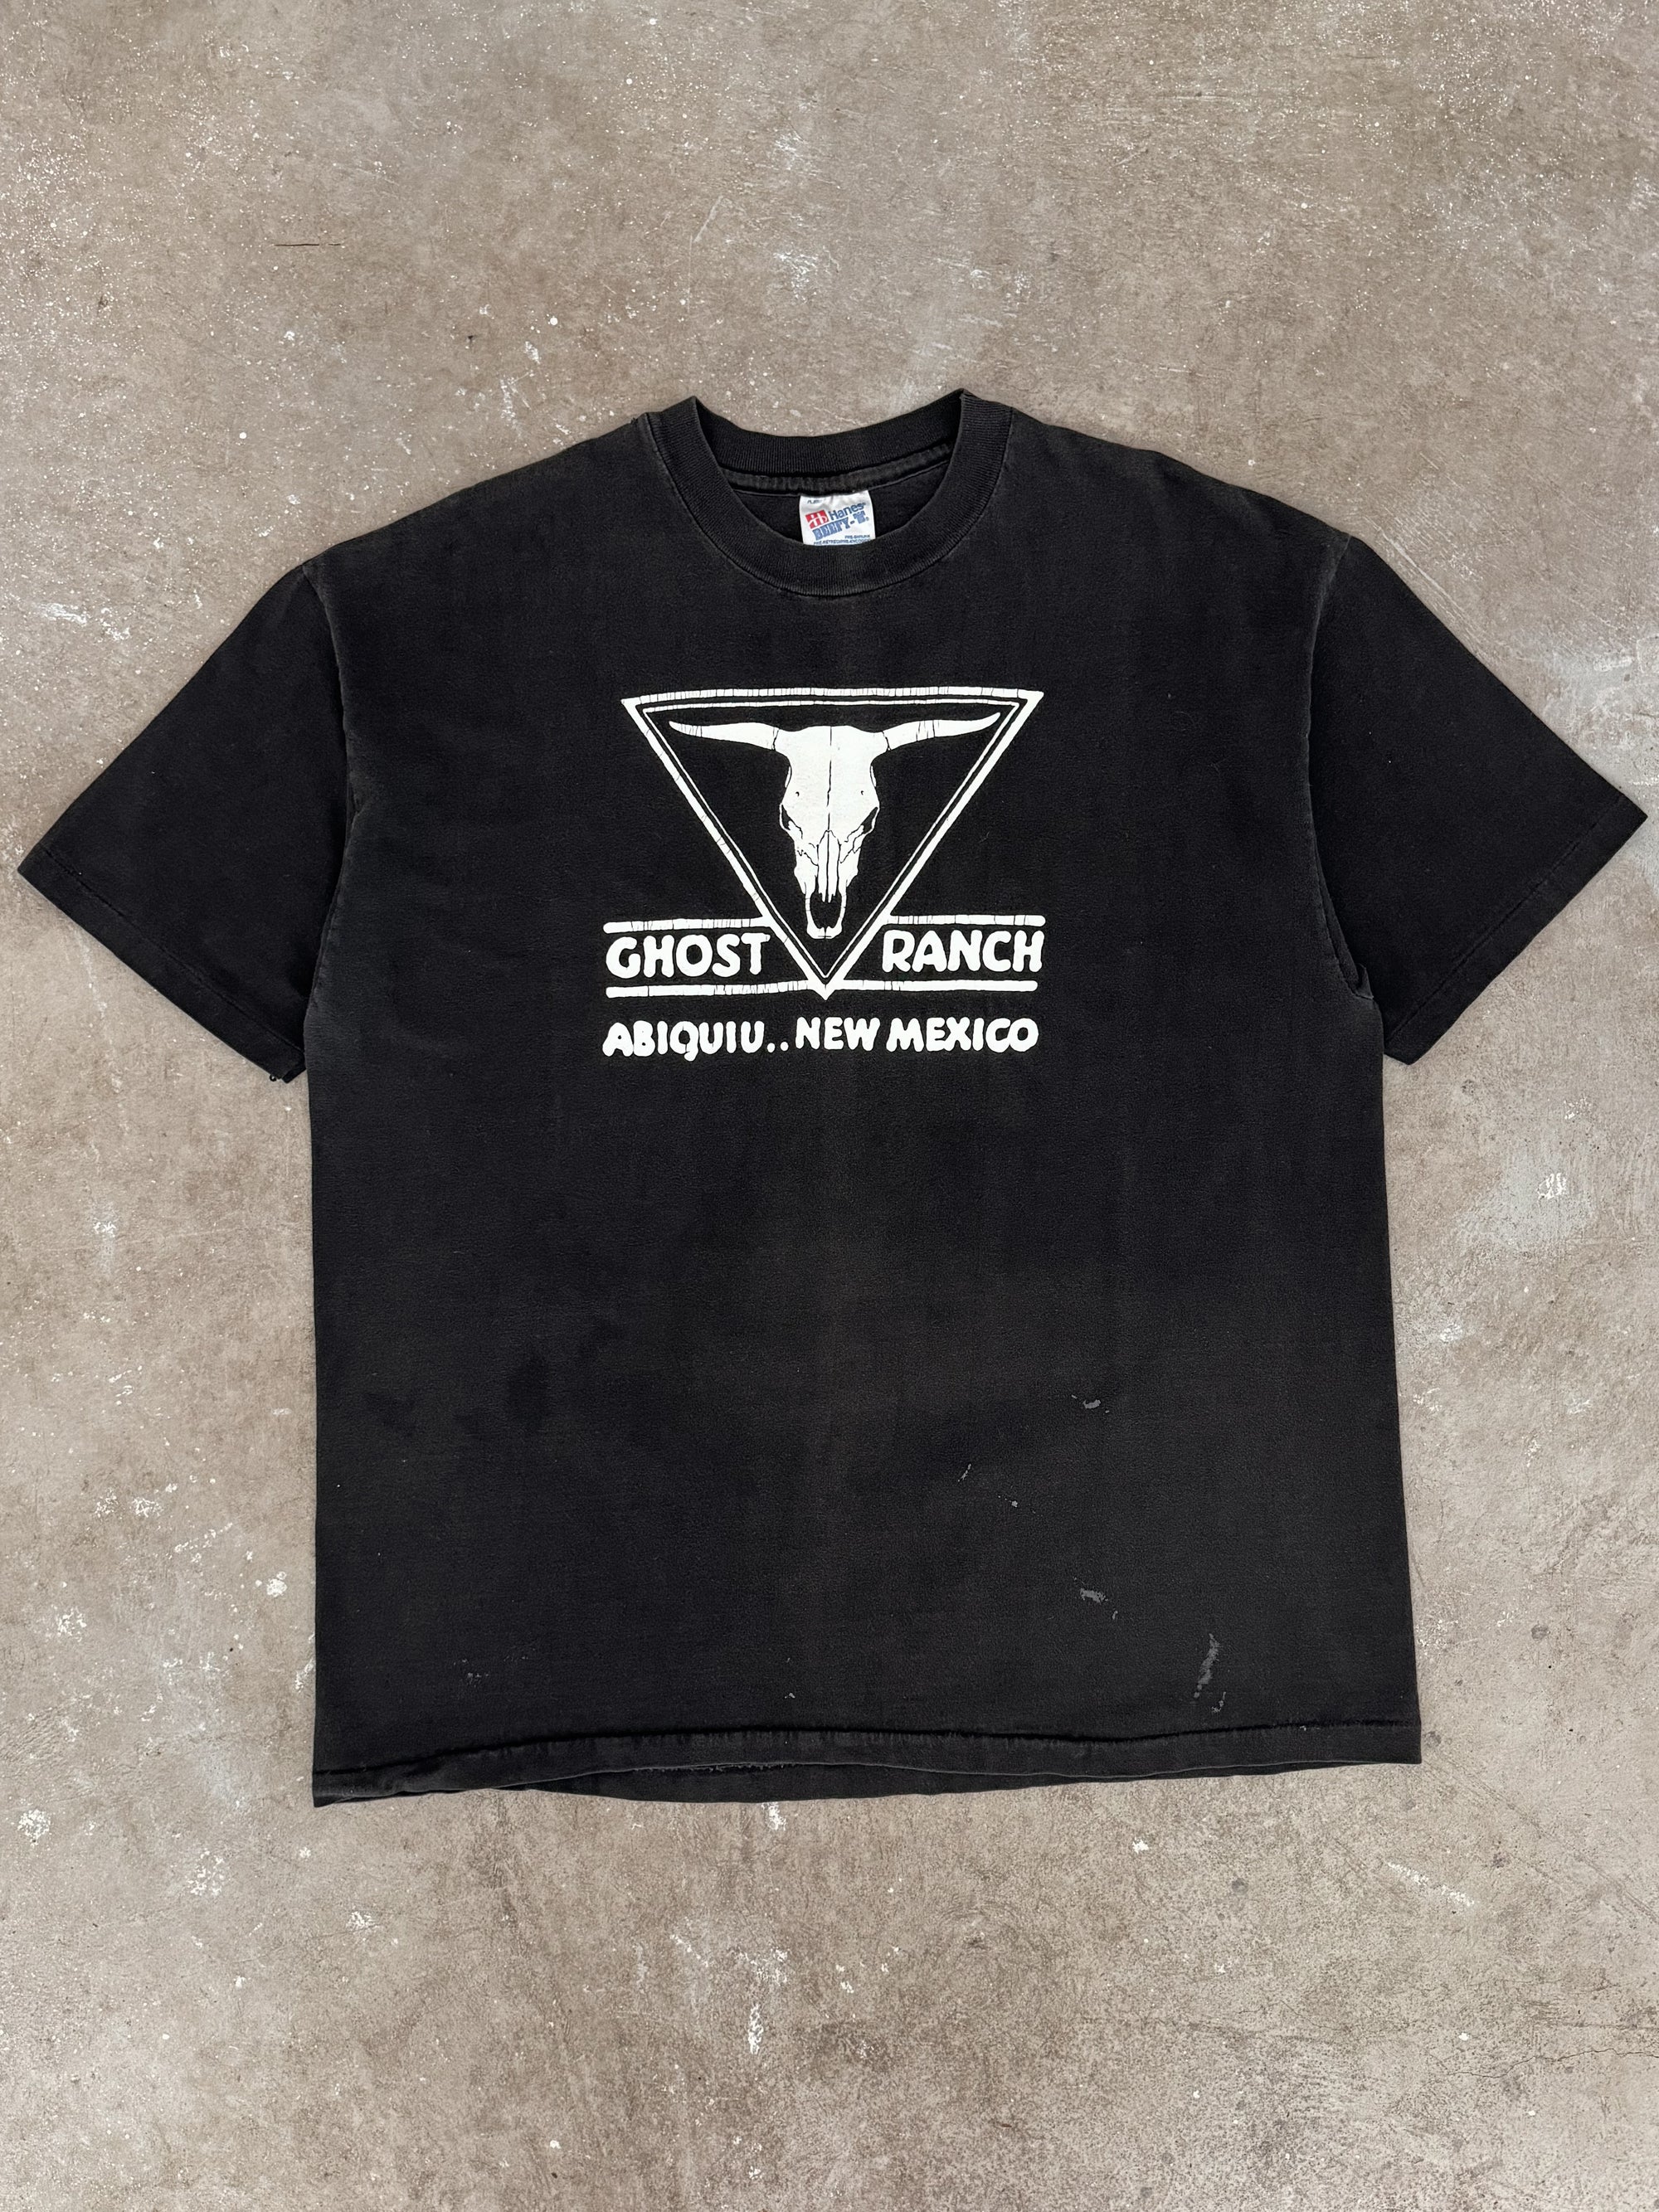 1990s "Ghost Ranch" Tee (L/XL)